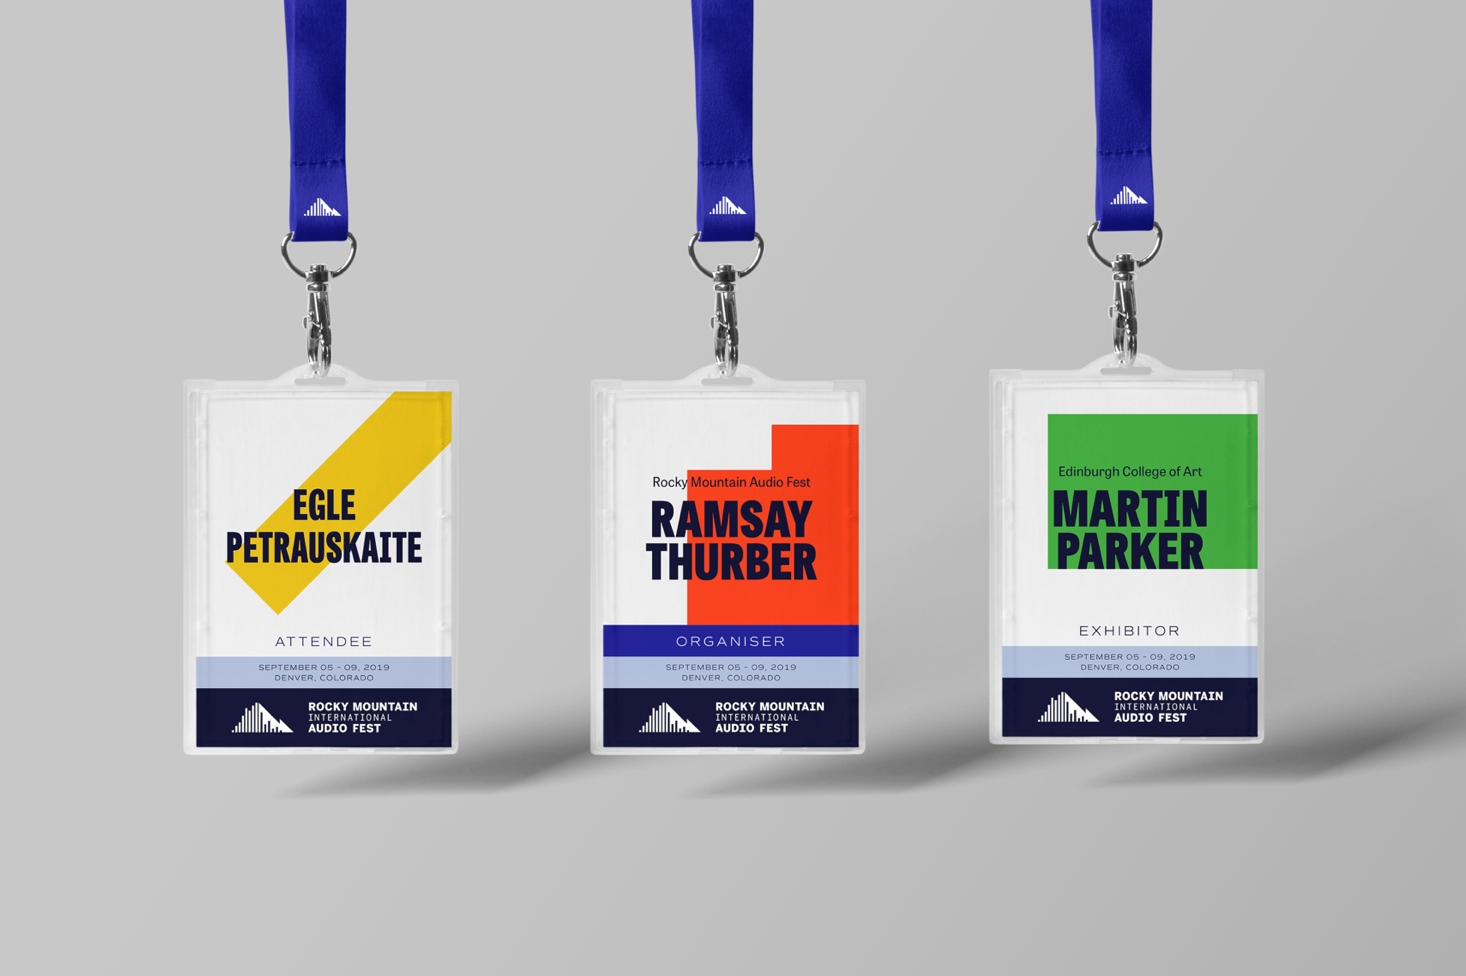 Three exhibitor lanyards each featuring a different name "Egle Petrauskaite", "Ramsay Thurber" and "Martin Parker"